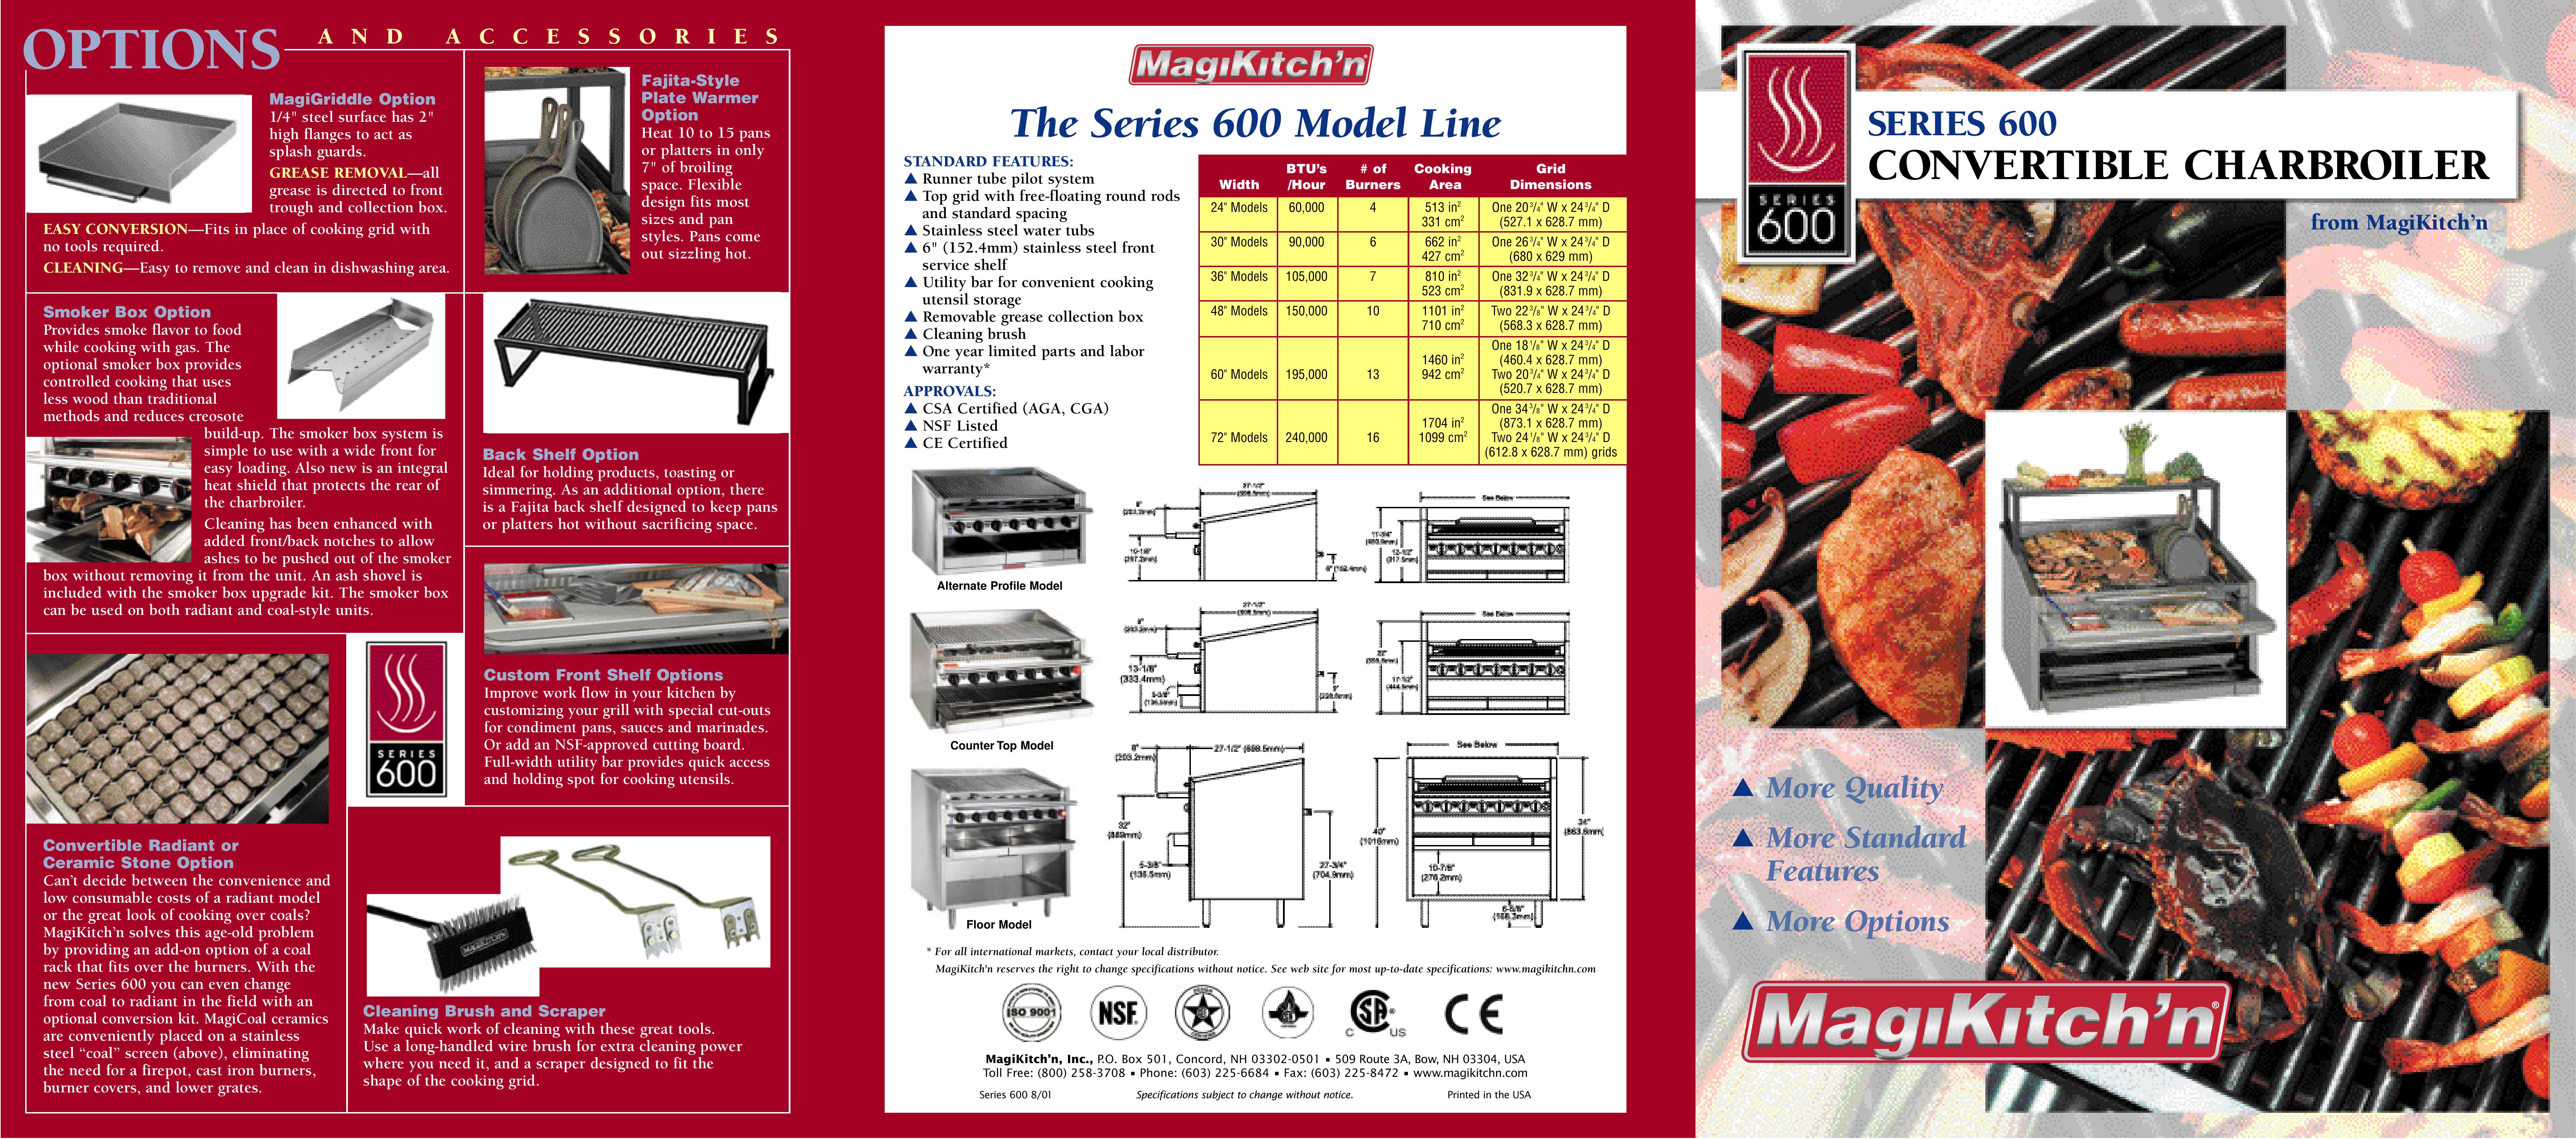 Magikitch'n SERIES 600 Charcoal Grill User Manual